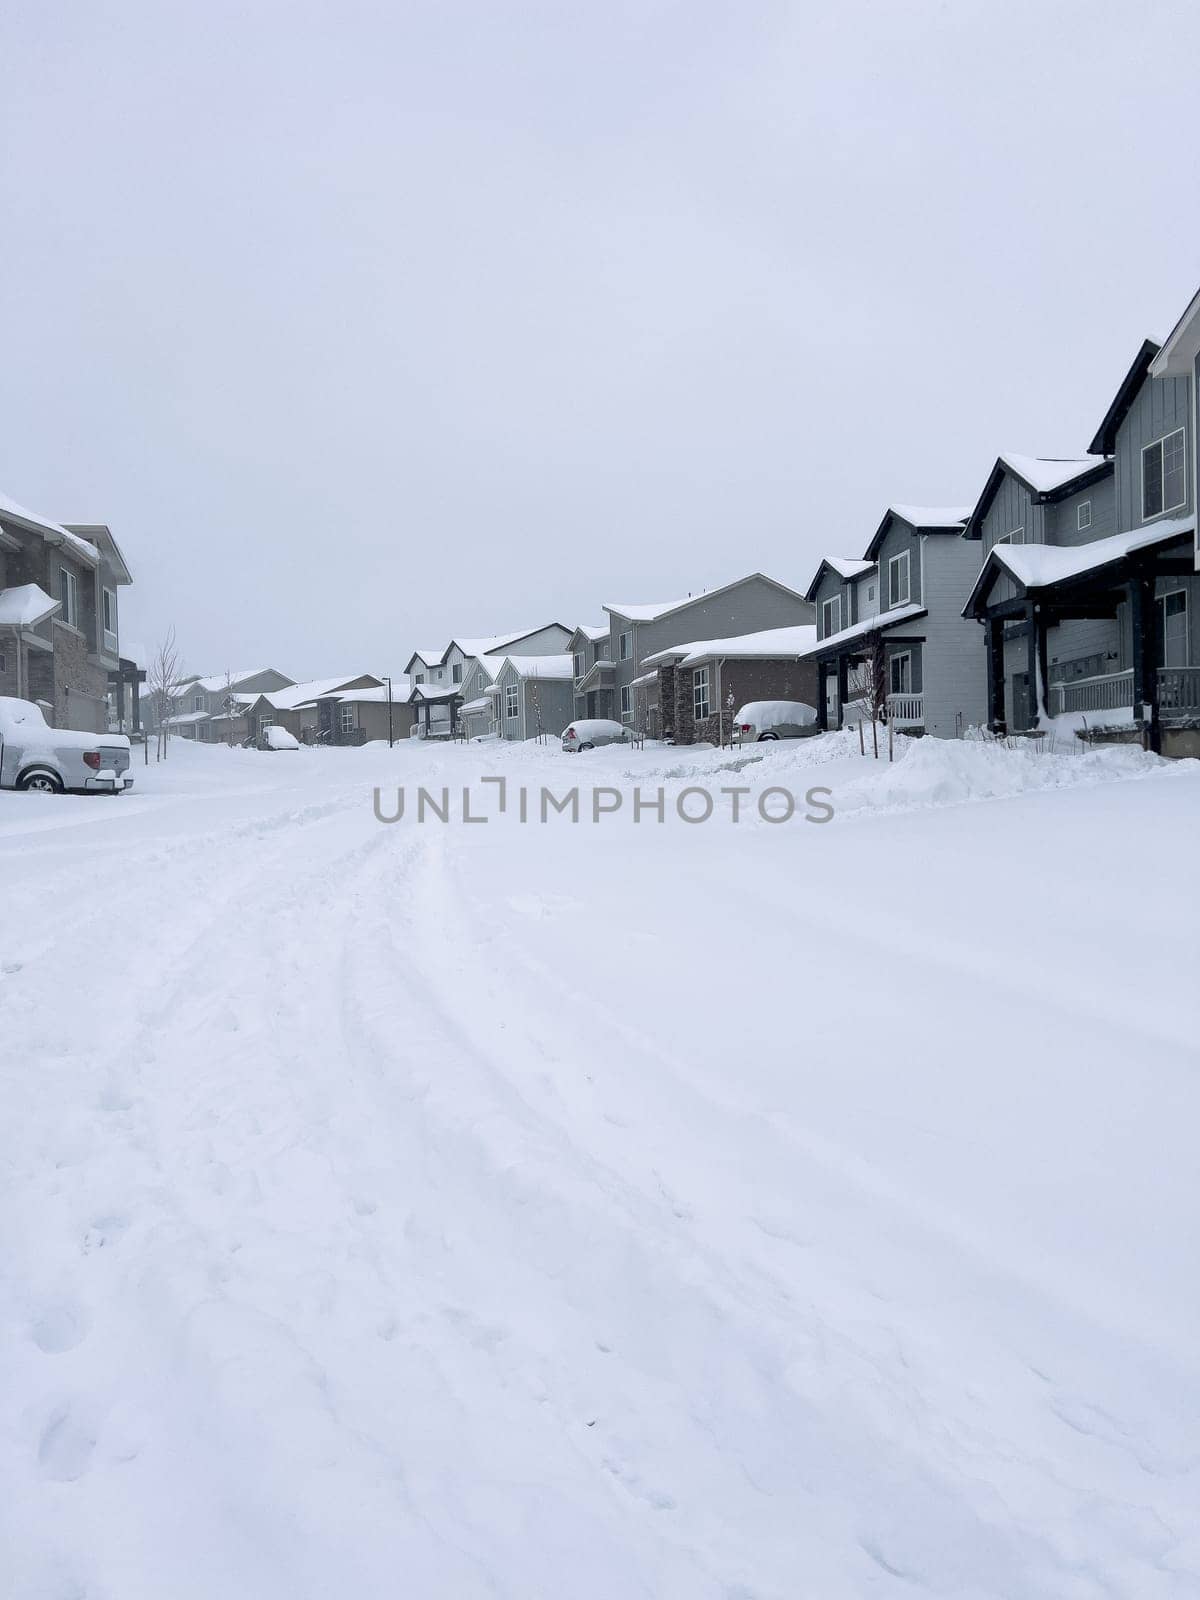 Castle Rock, Colorado, USA-March 16, 2024-The scene depicts a suburban tranquility with homes lining a street blanketed in snow, punctuated by a cleared path that weaves through the winter wonderland. The overcast sky promises more snow, creating a hushed atmosphere over the neighborhood.